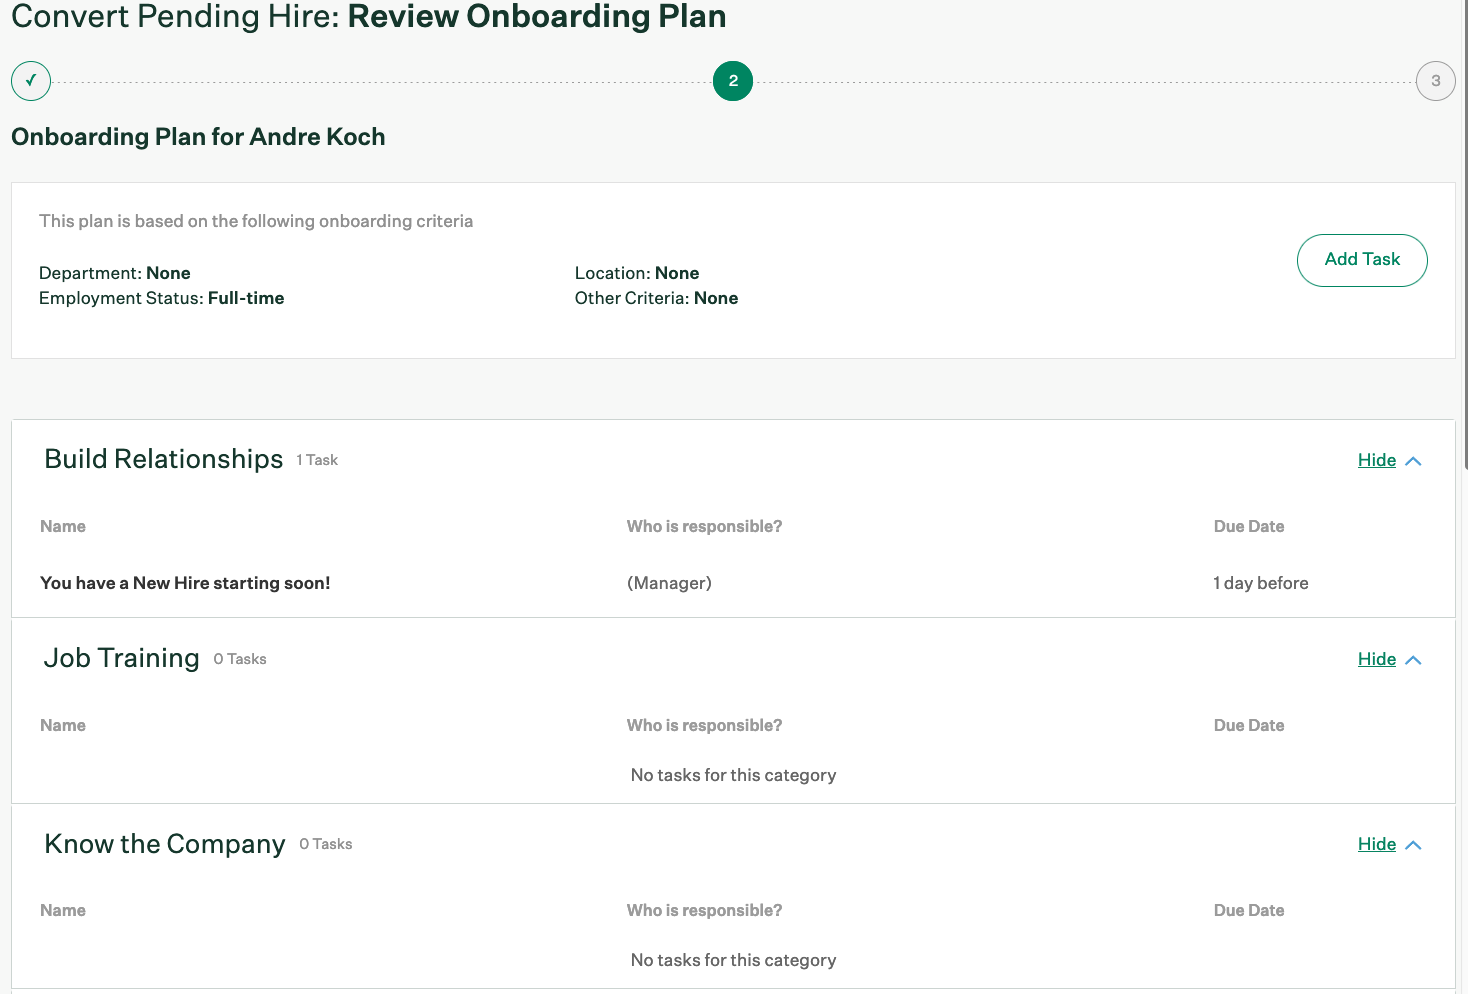 Screenshot of review onboarding plan page 